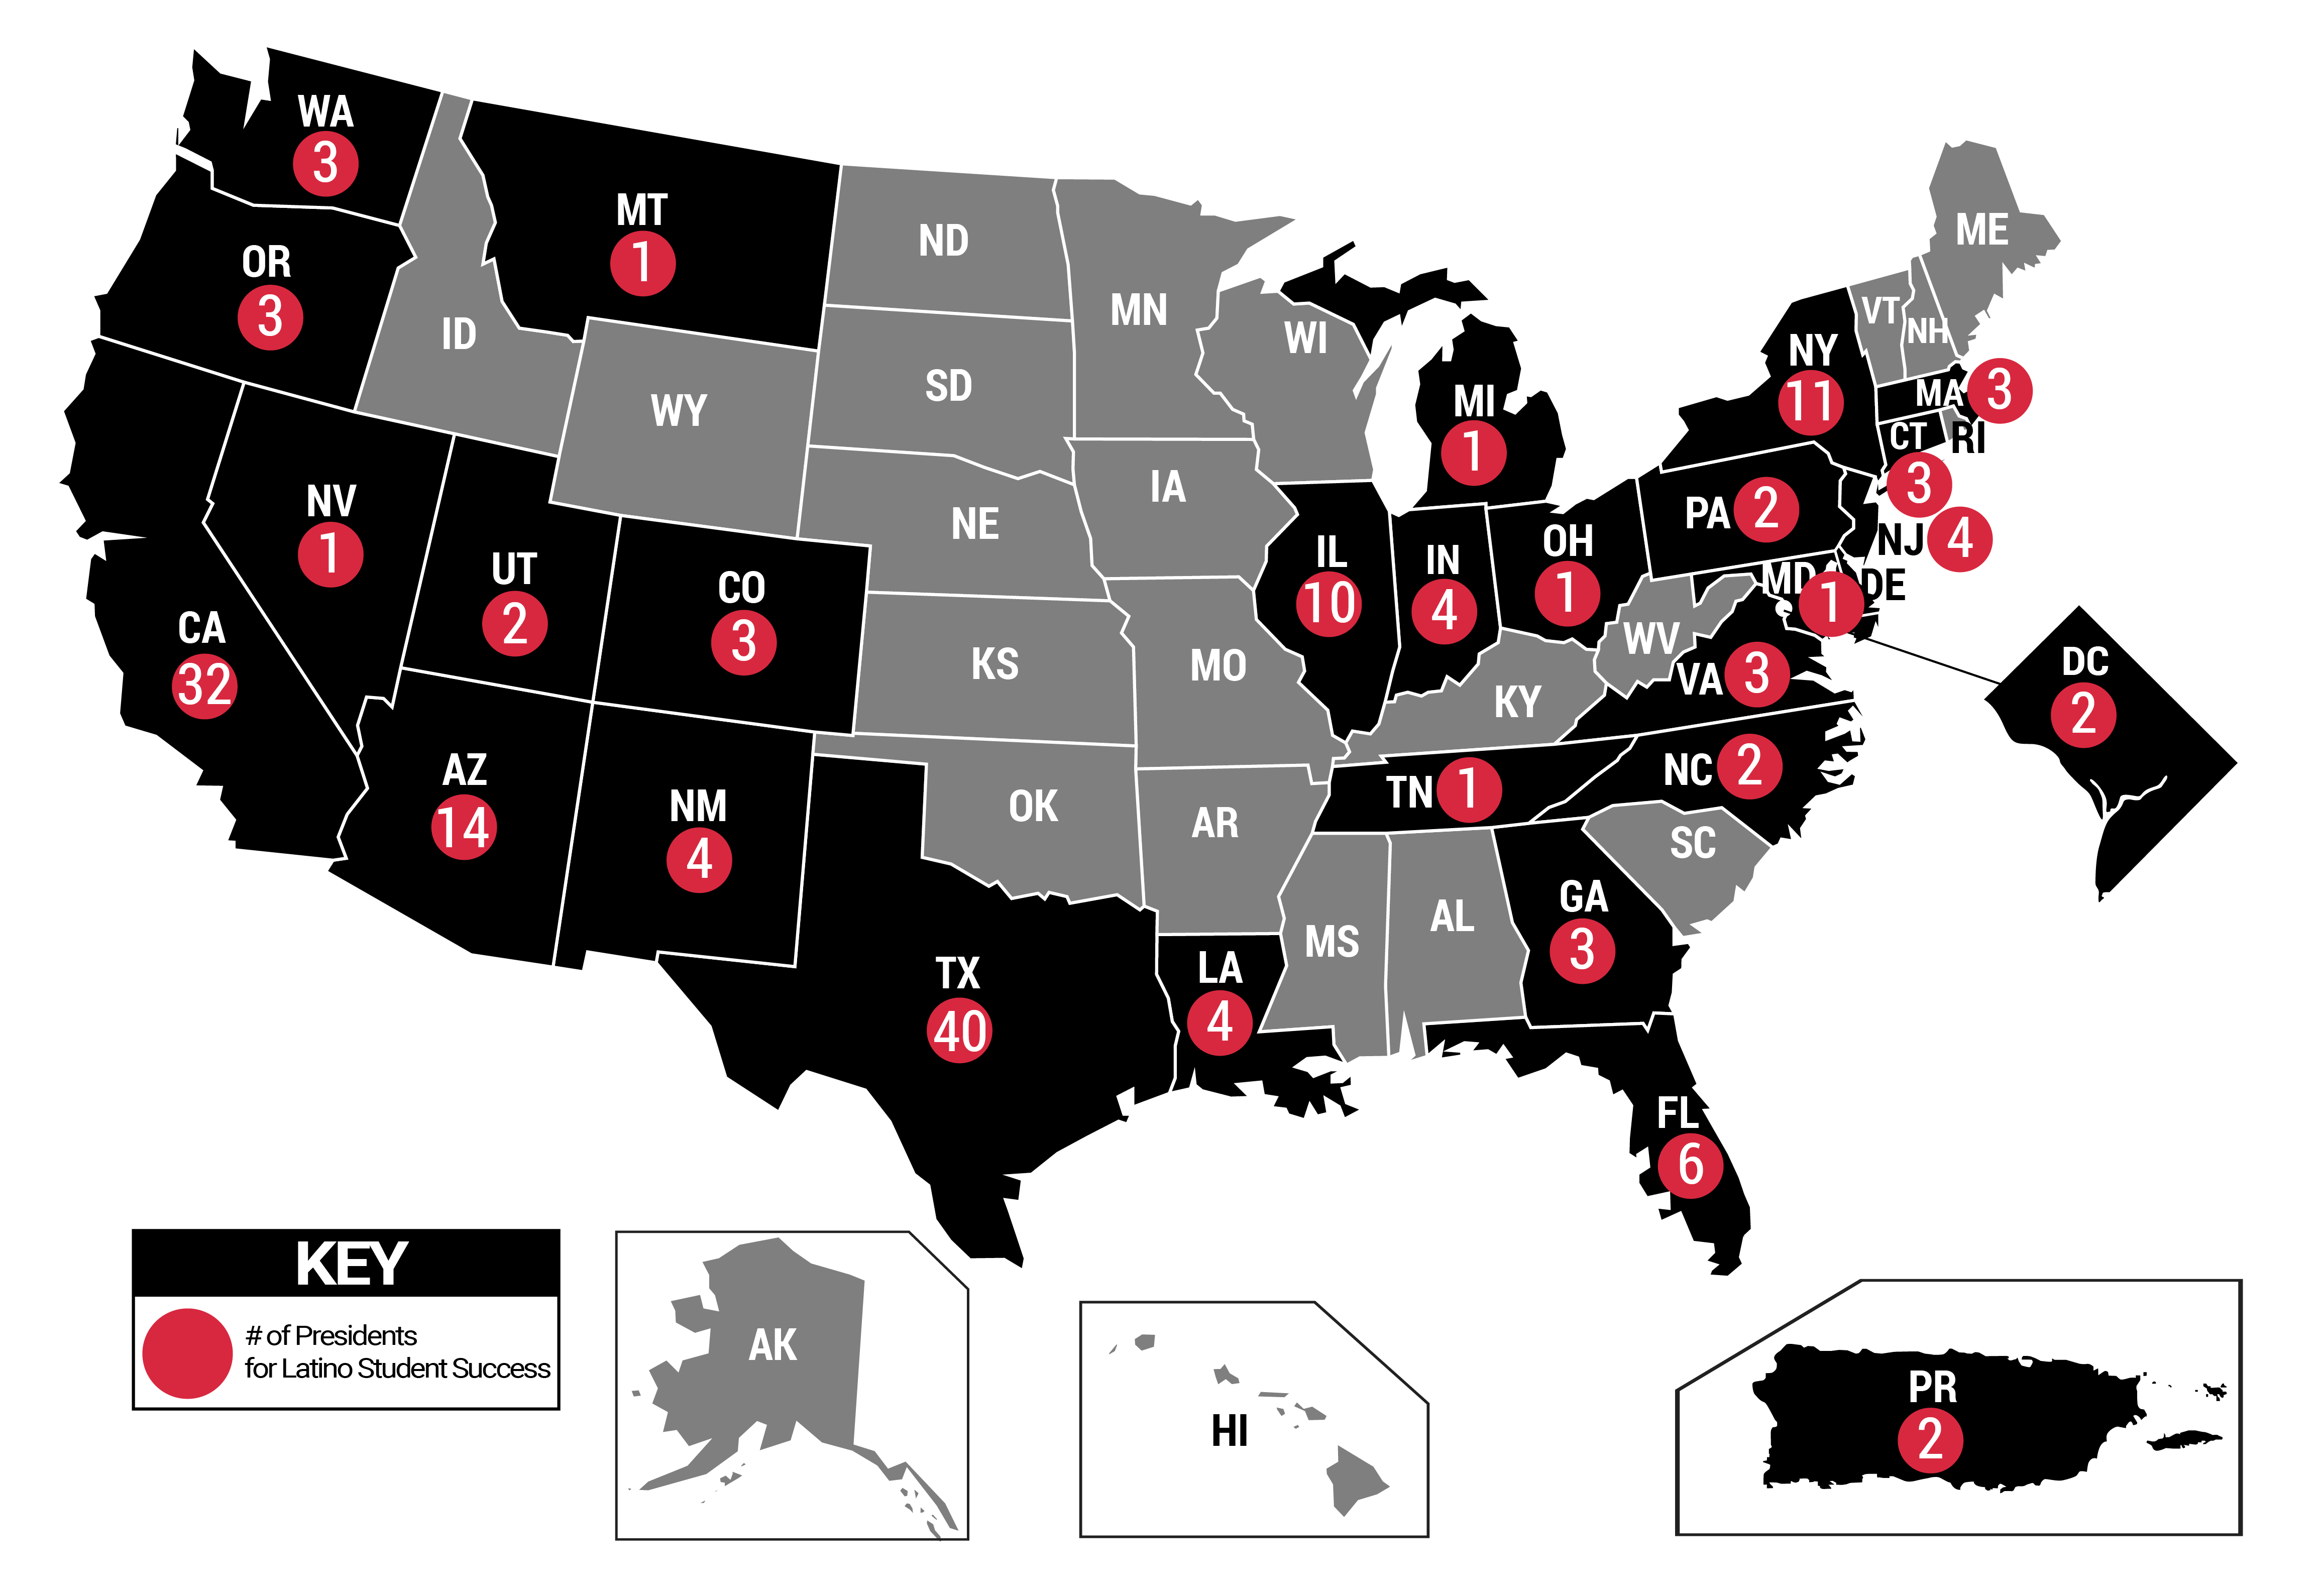 President For Latino Student Success Map - 166 institutions represented and 28 states